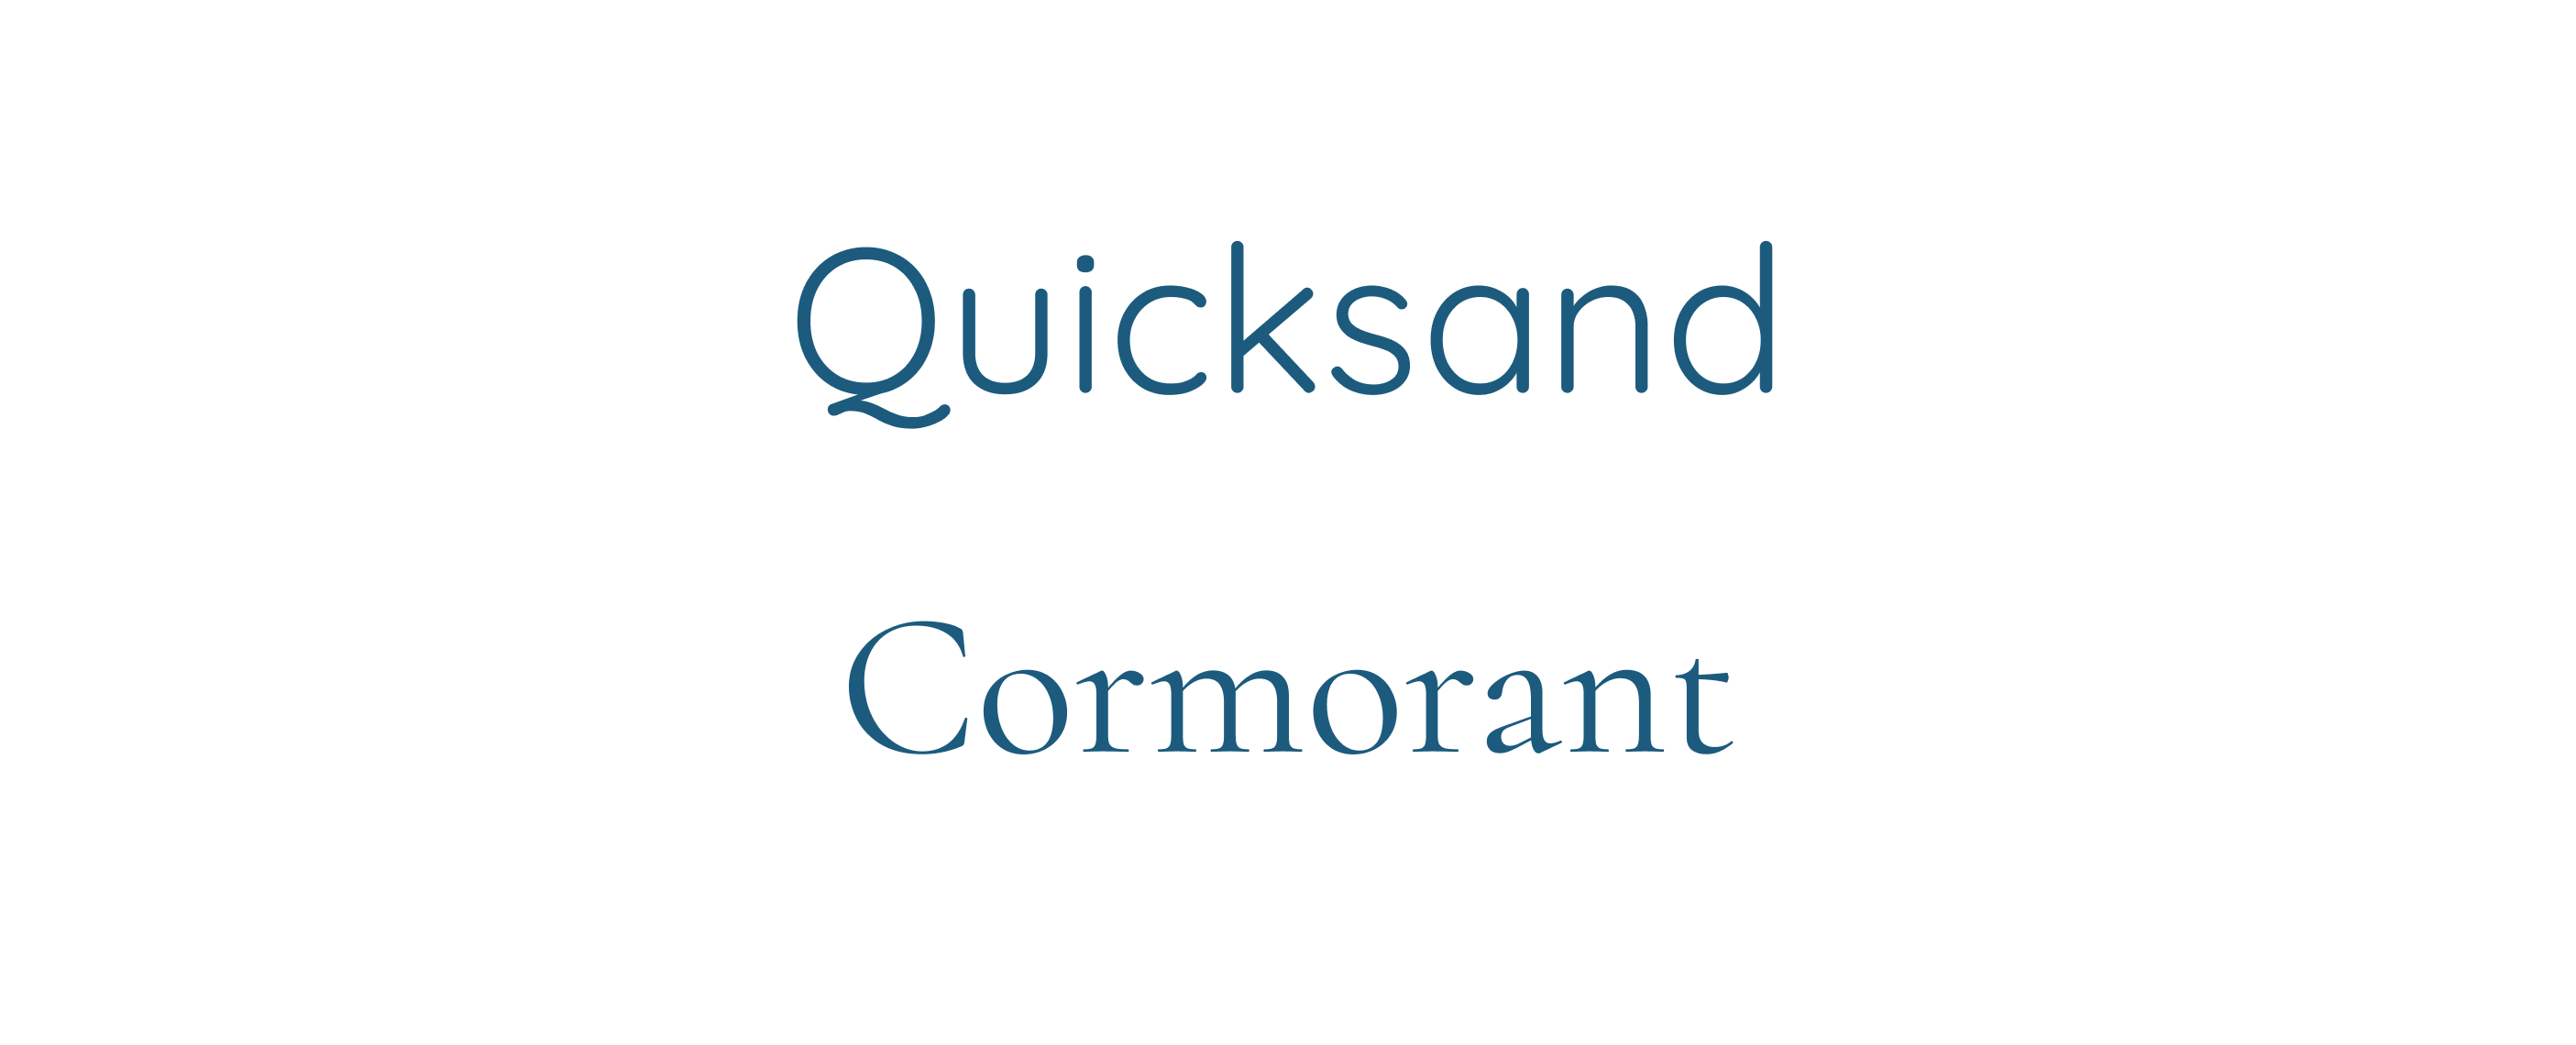 <strong>Fig 10</strong>: ChatGPT’s recommendation of pairing Quicksand with Cormorant.